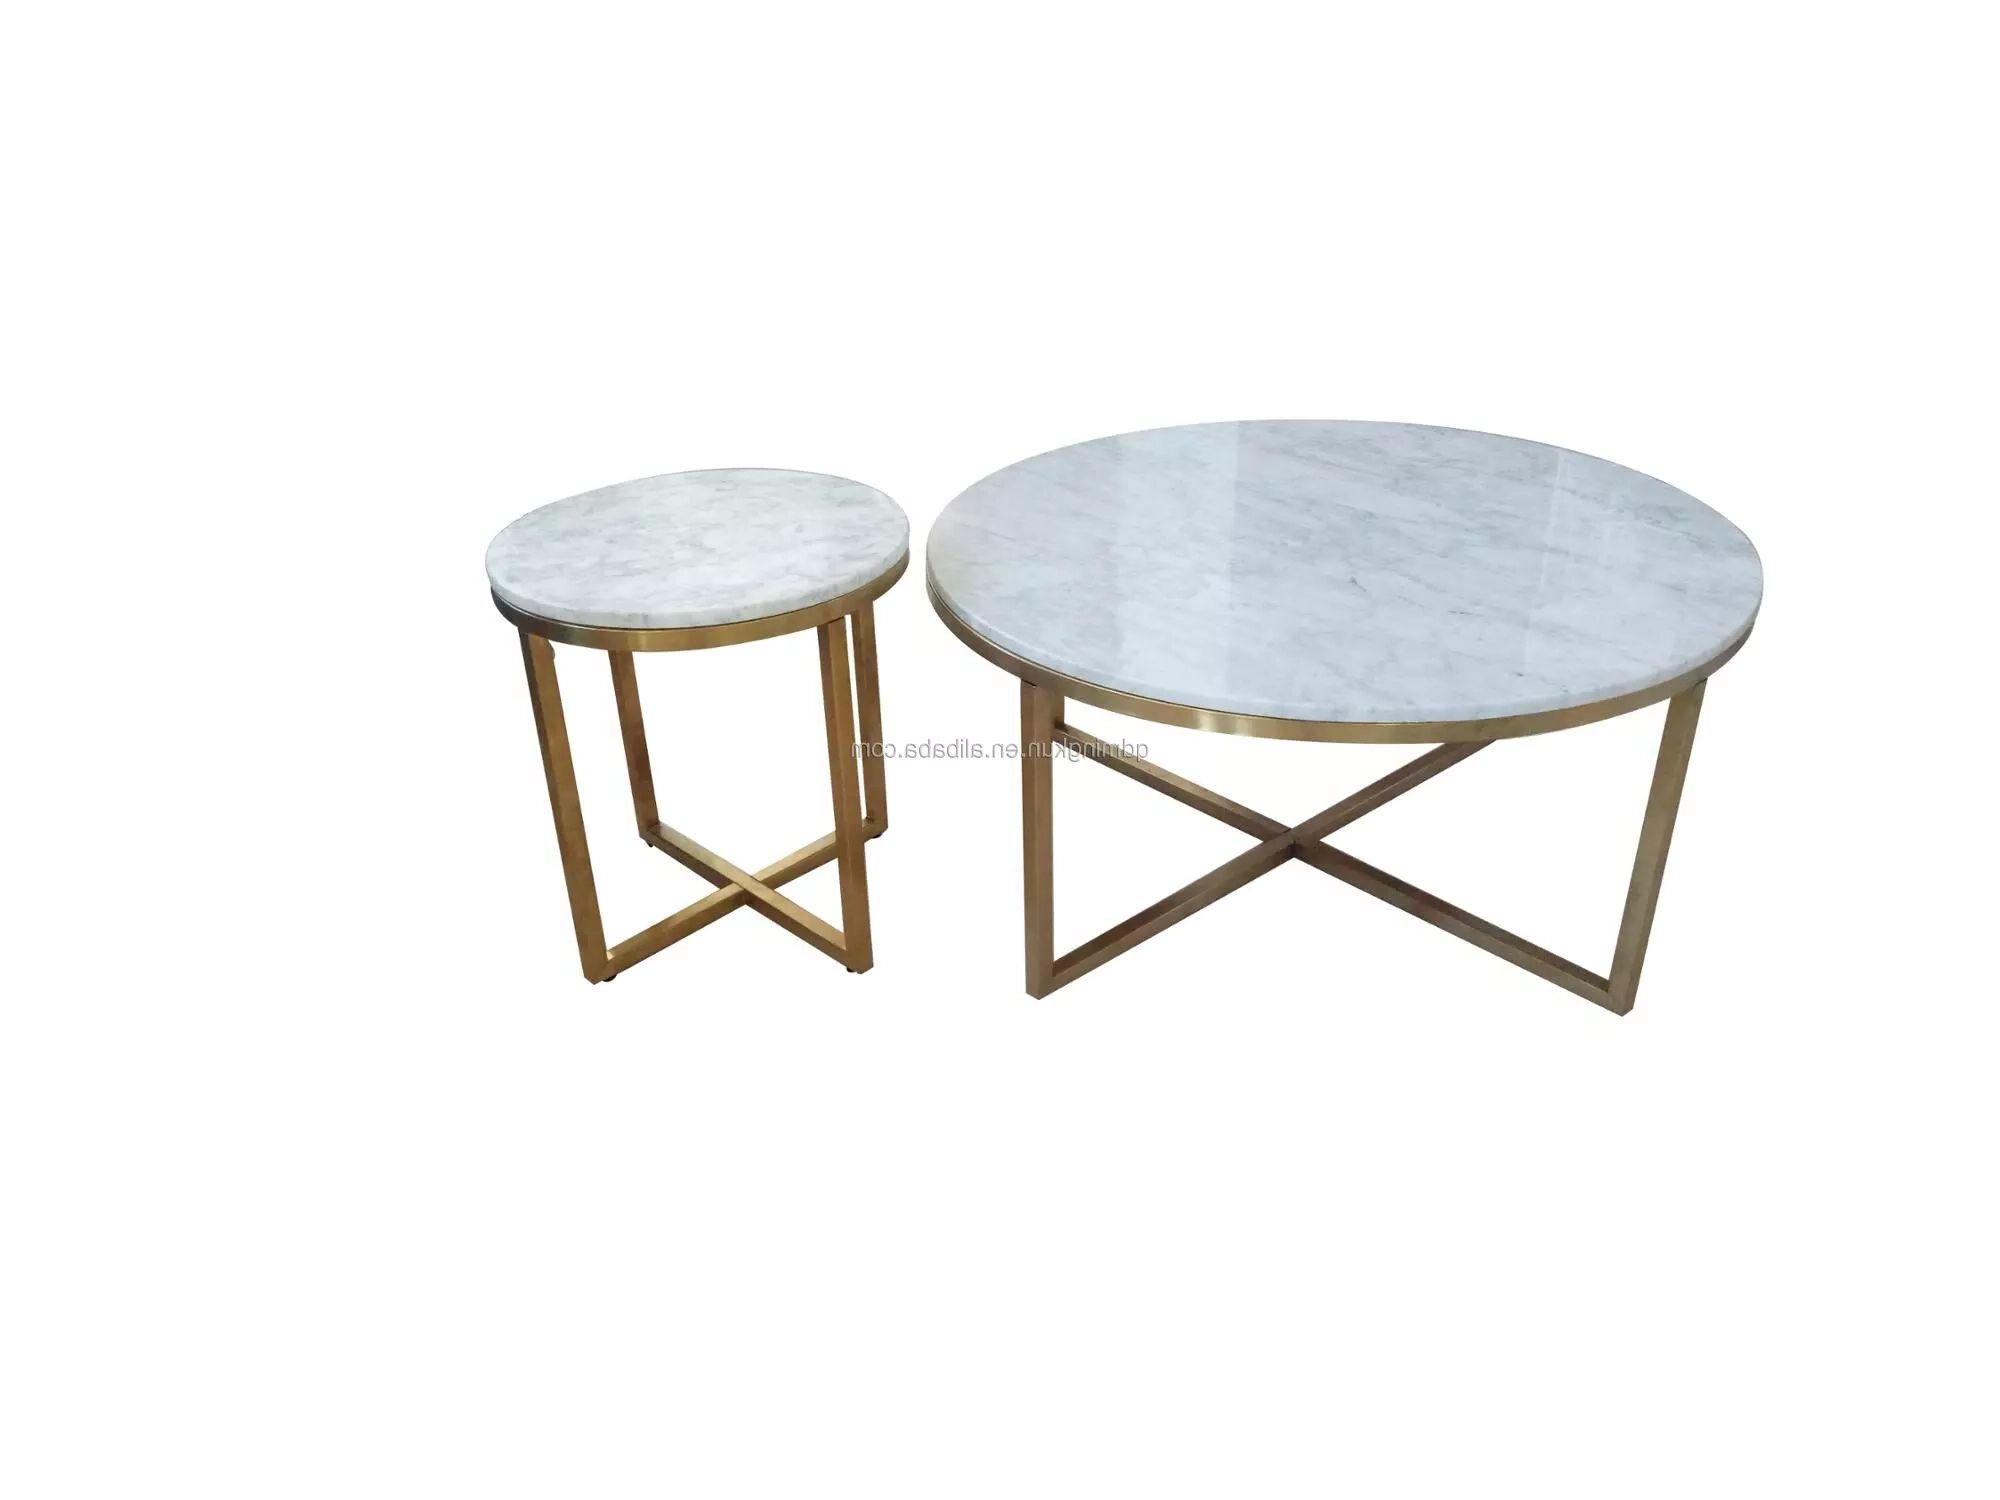 Modern Round Nesting Marble Metal Legs For Coffee Tables – Buy Modern Round  Nesting Coffee Tables,metal Legs For Coffee Table,marble Coffee Tables  Product On Alibaba Within 2019 Splayed Metal Legs Coffee Tables (View 16 of 20)